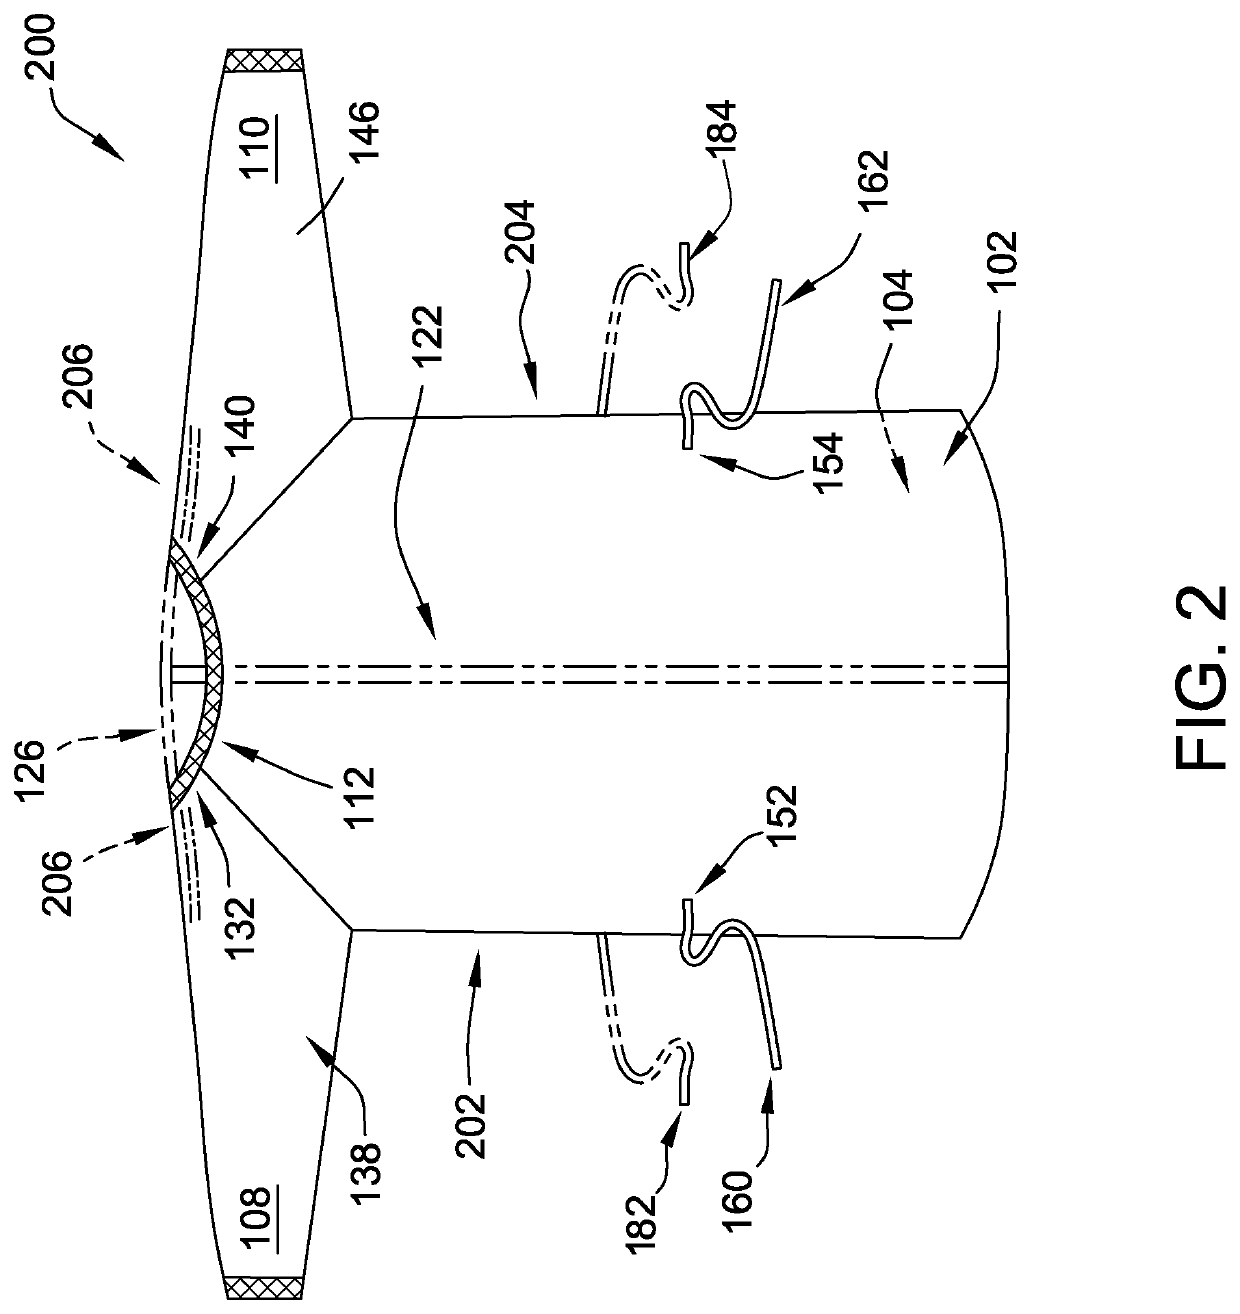 Over-the-head disposable contact isolation gown and method for making the same